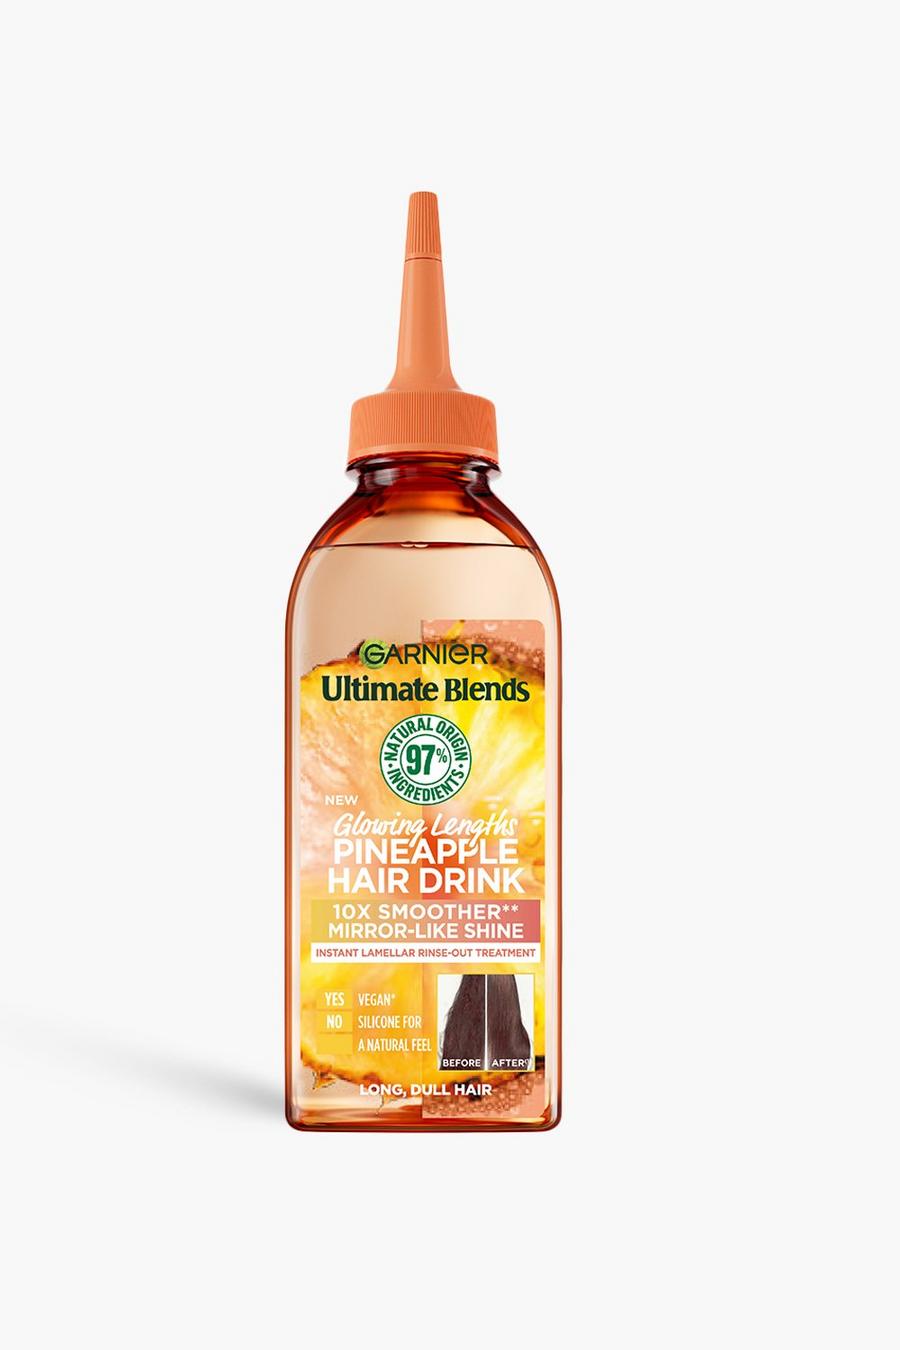 Multi Garnier Ultimate Blends Glowing Lengths Pineapple Hair Drink liquid conditioner for, long dull hair image number 1